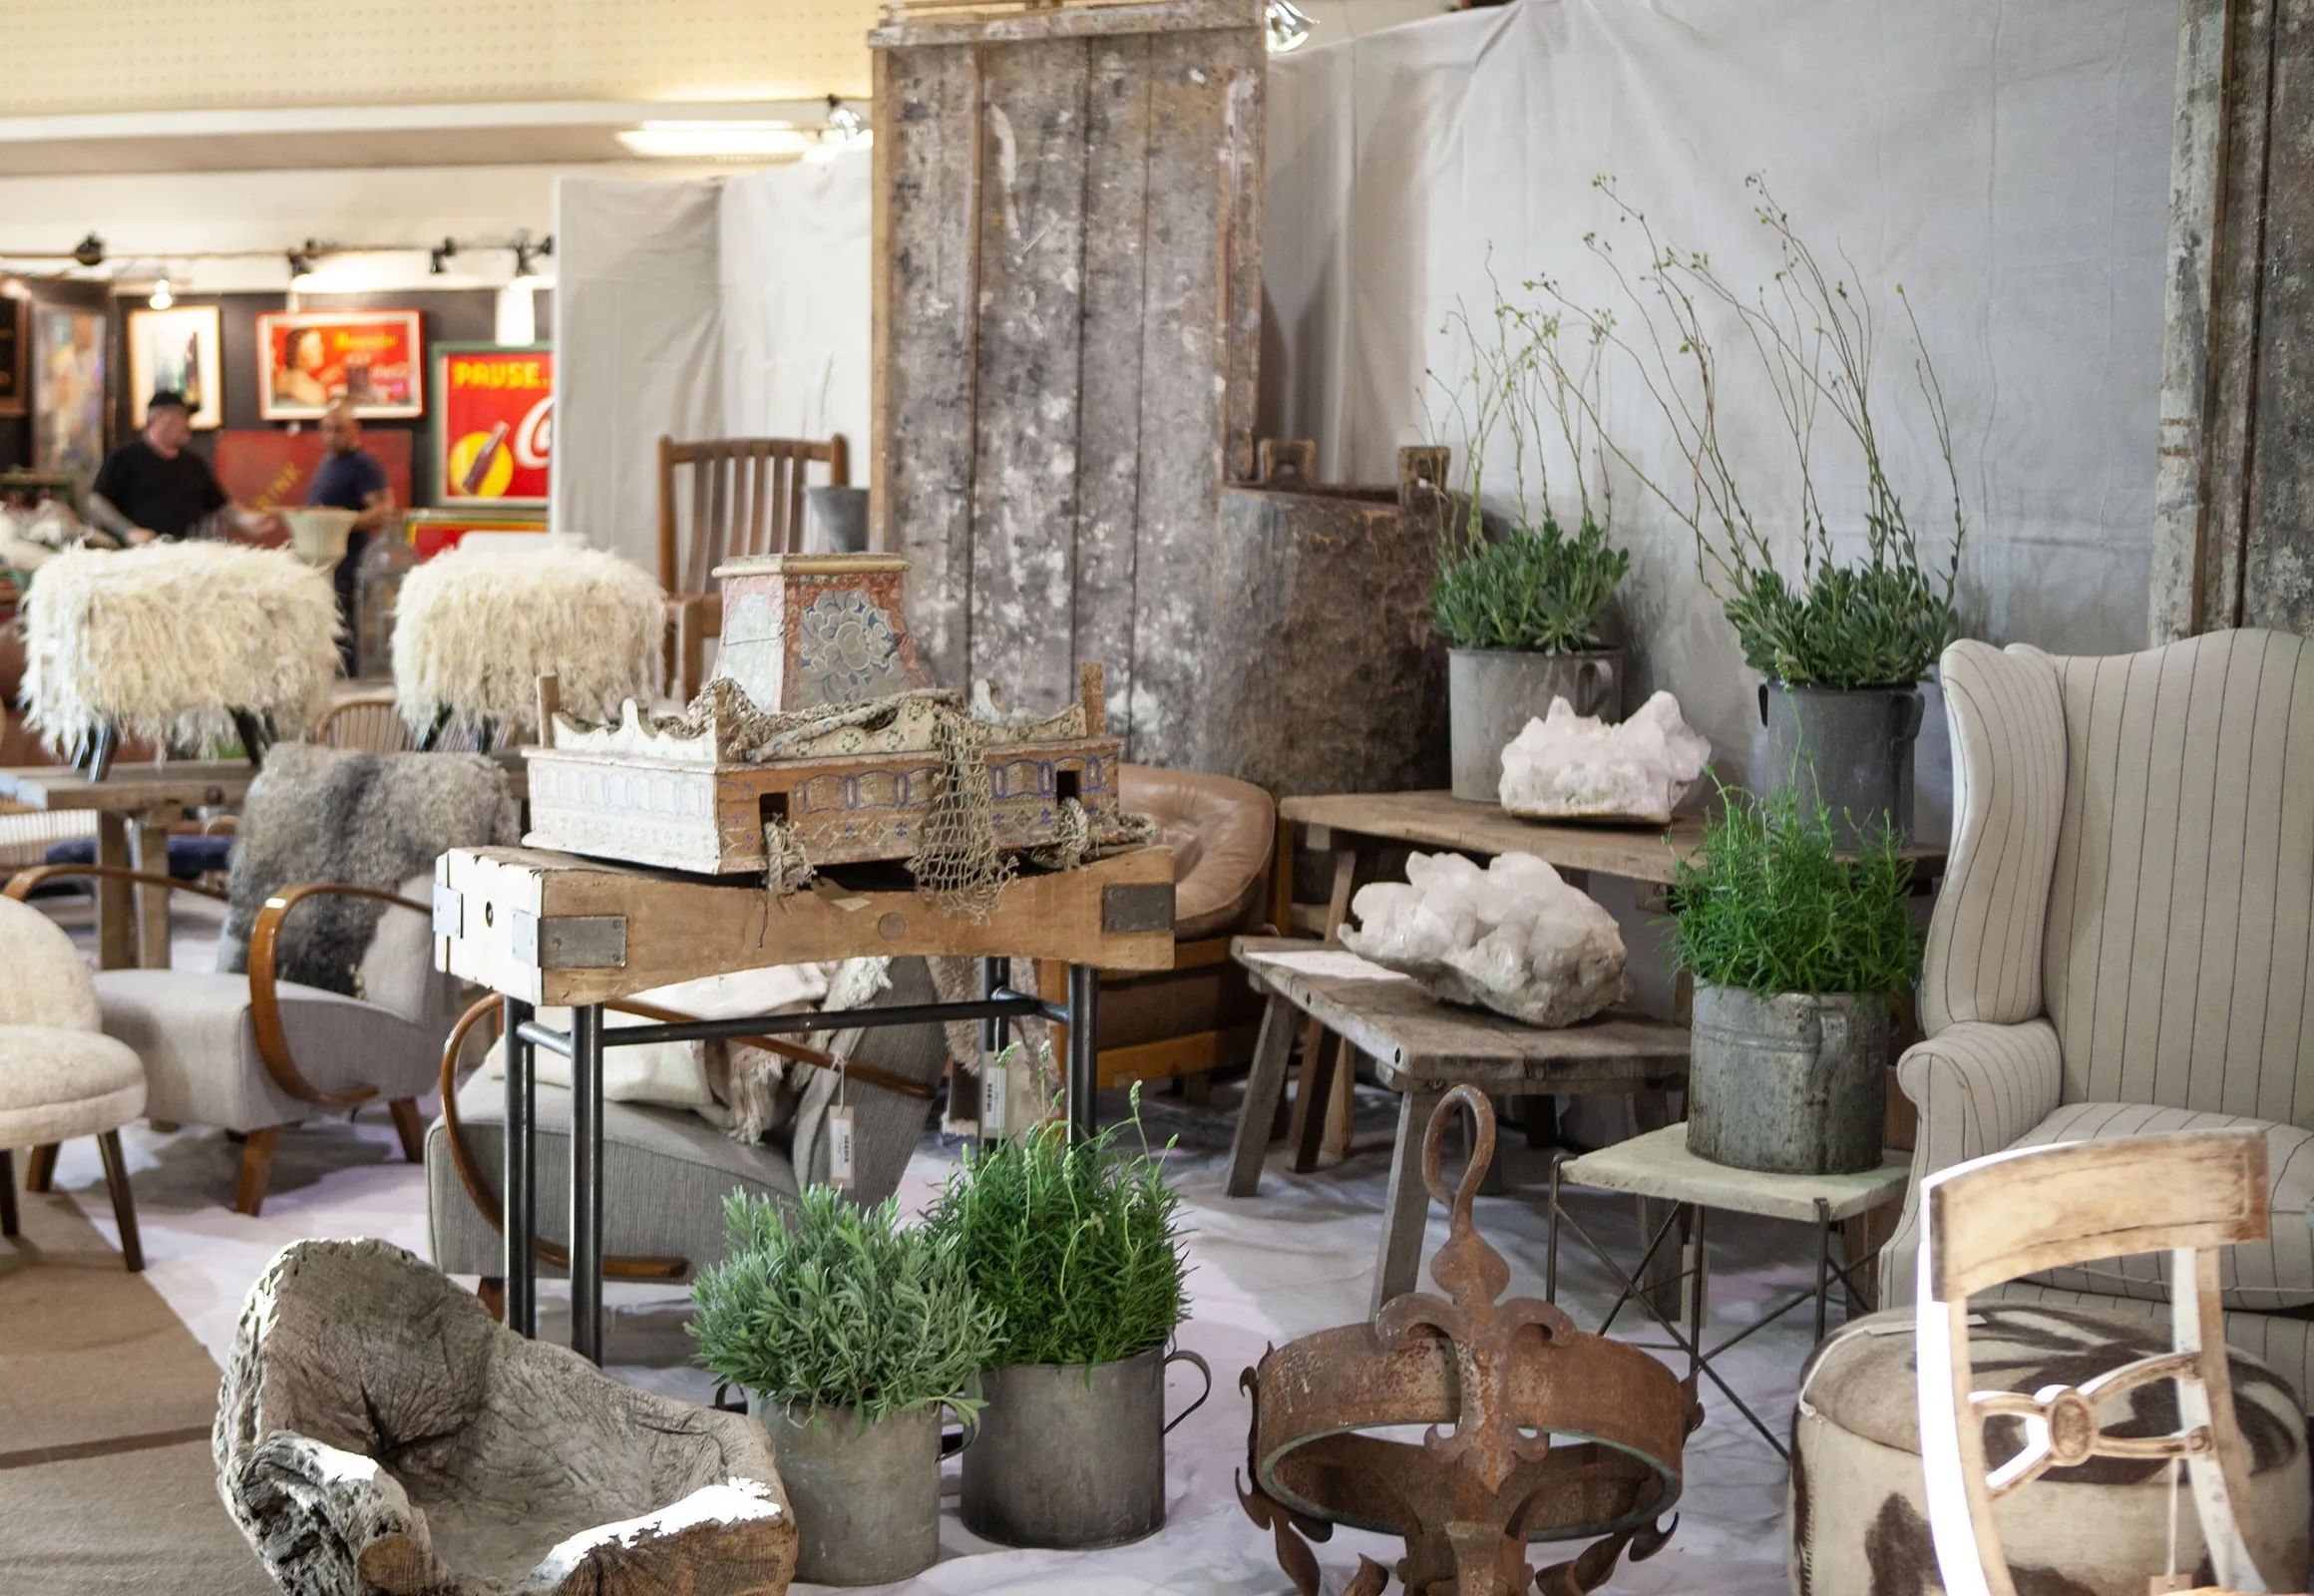 A shop full of vintage furniture and accessories